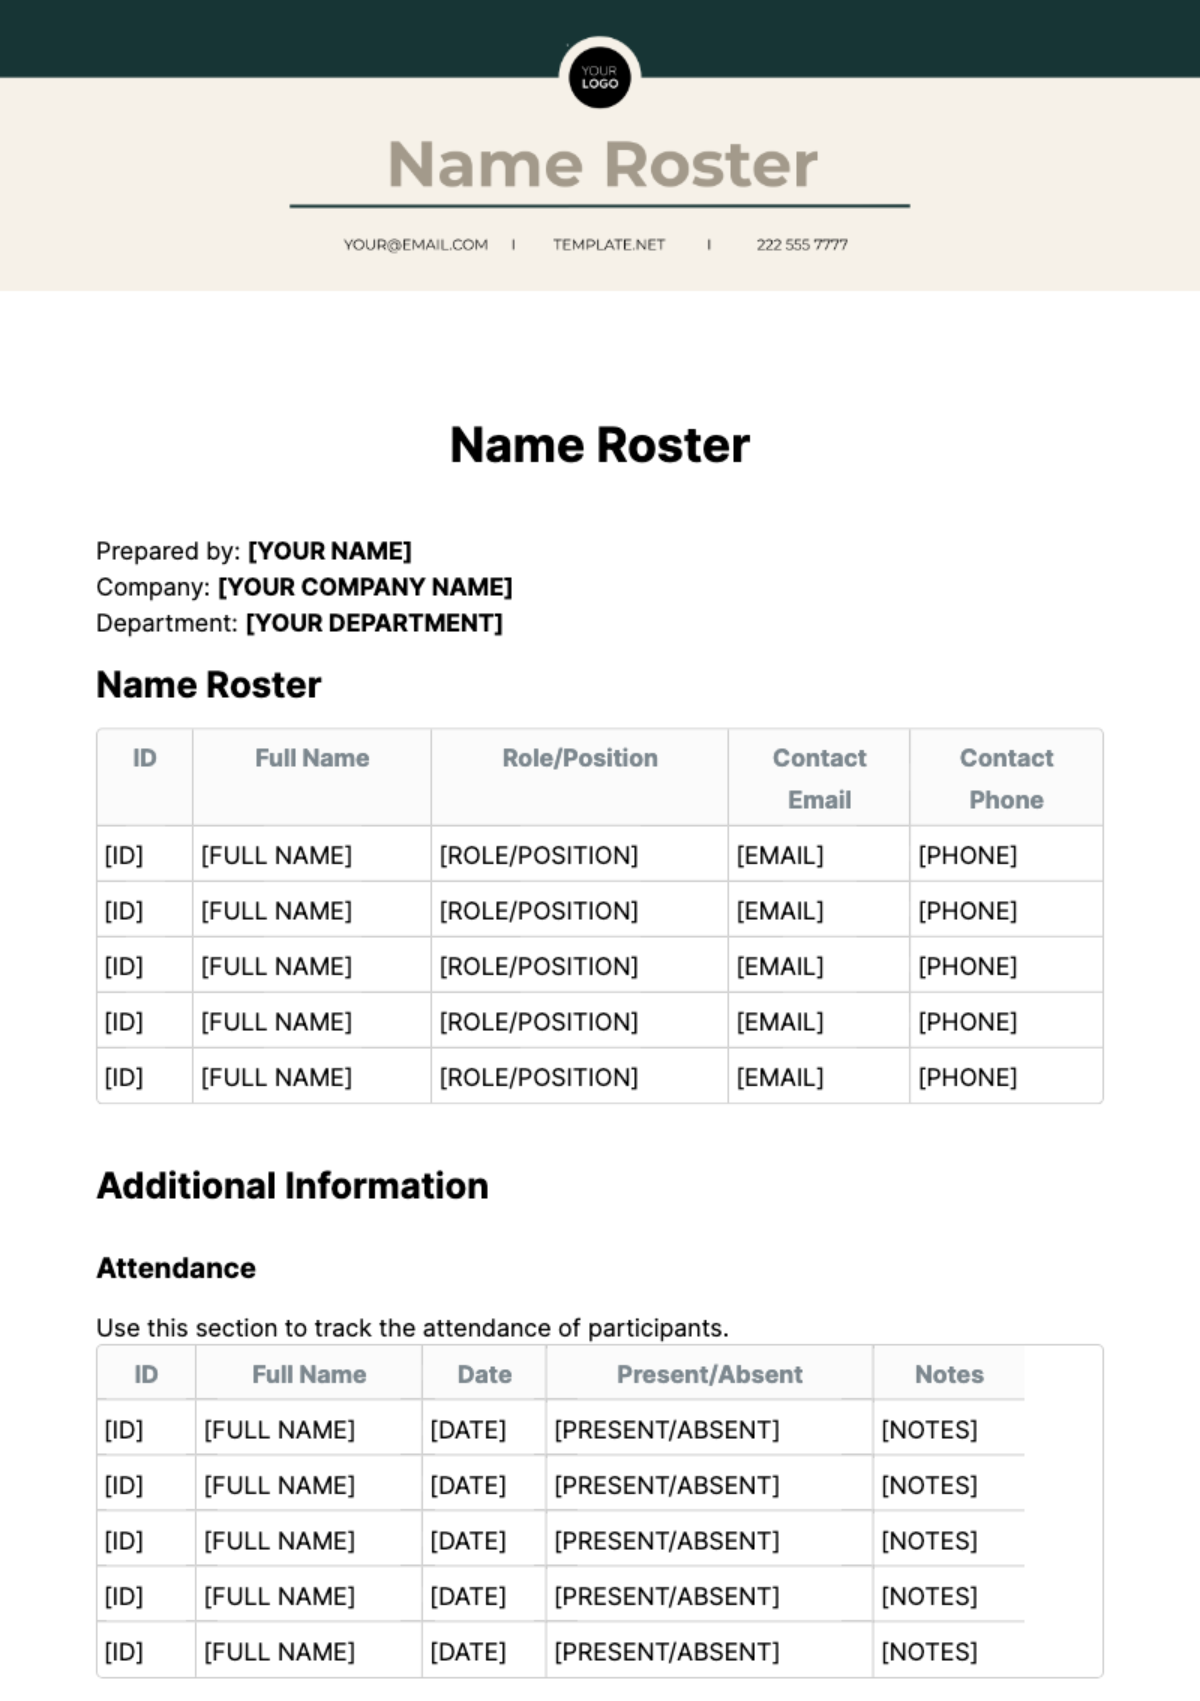 Name Roster Template